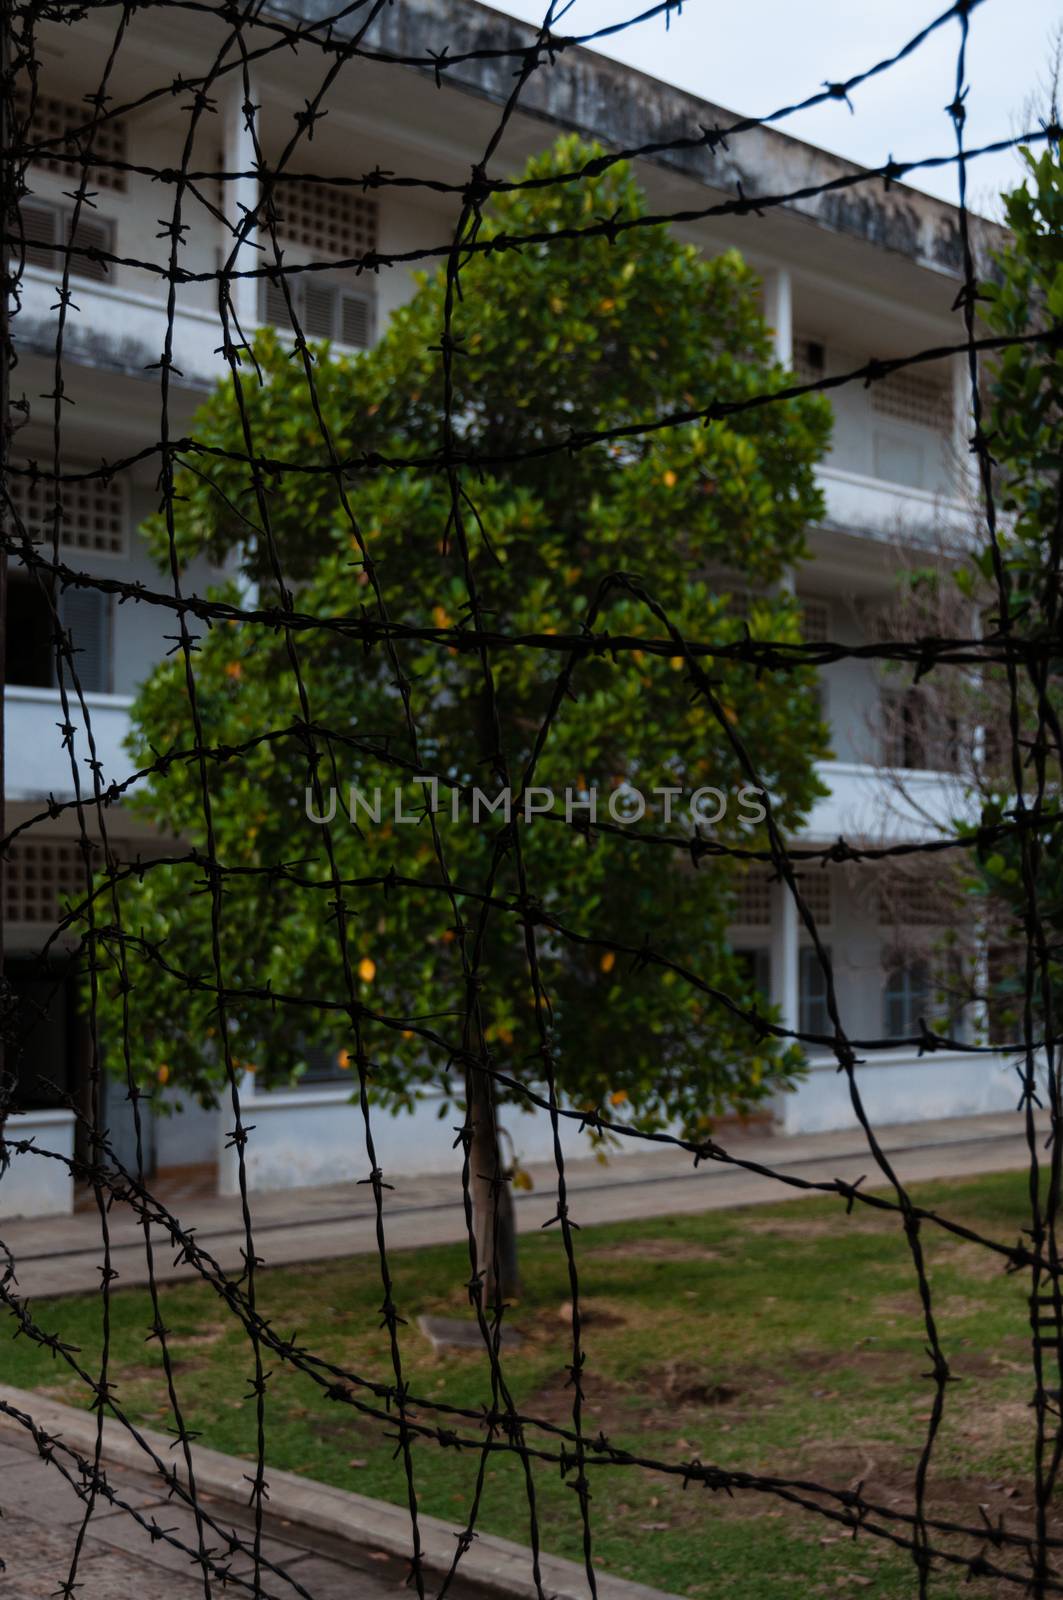 Look through Barbed wire at s21 Tuol Sleng in Phnom Penh Cambodia